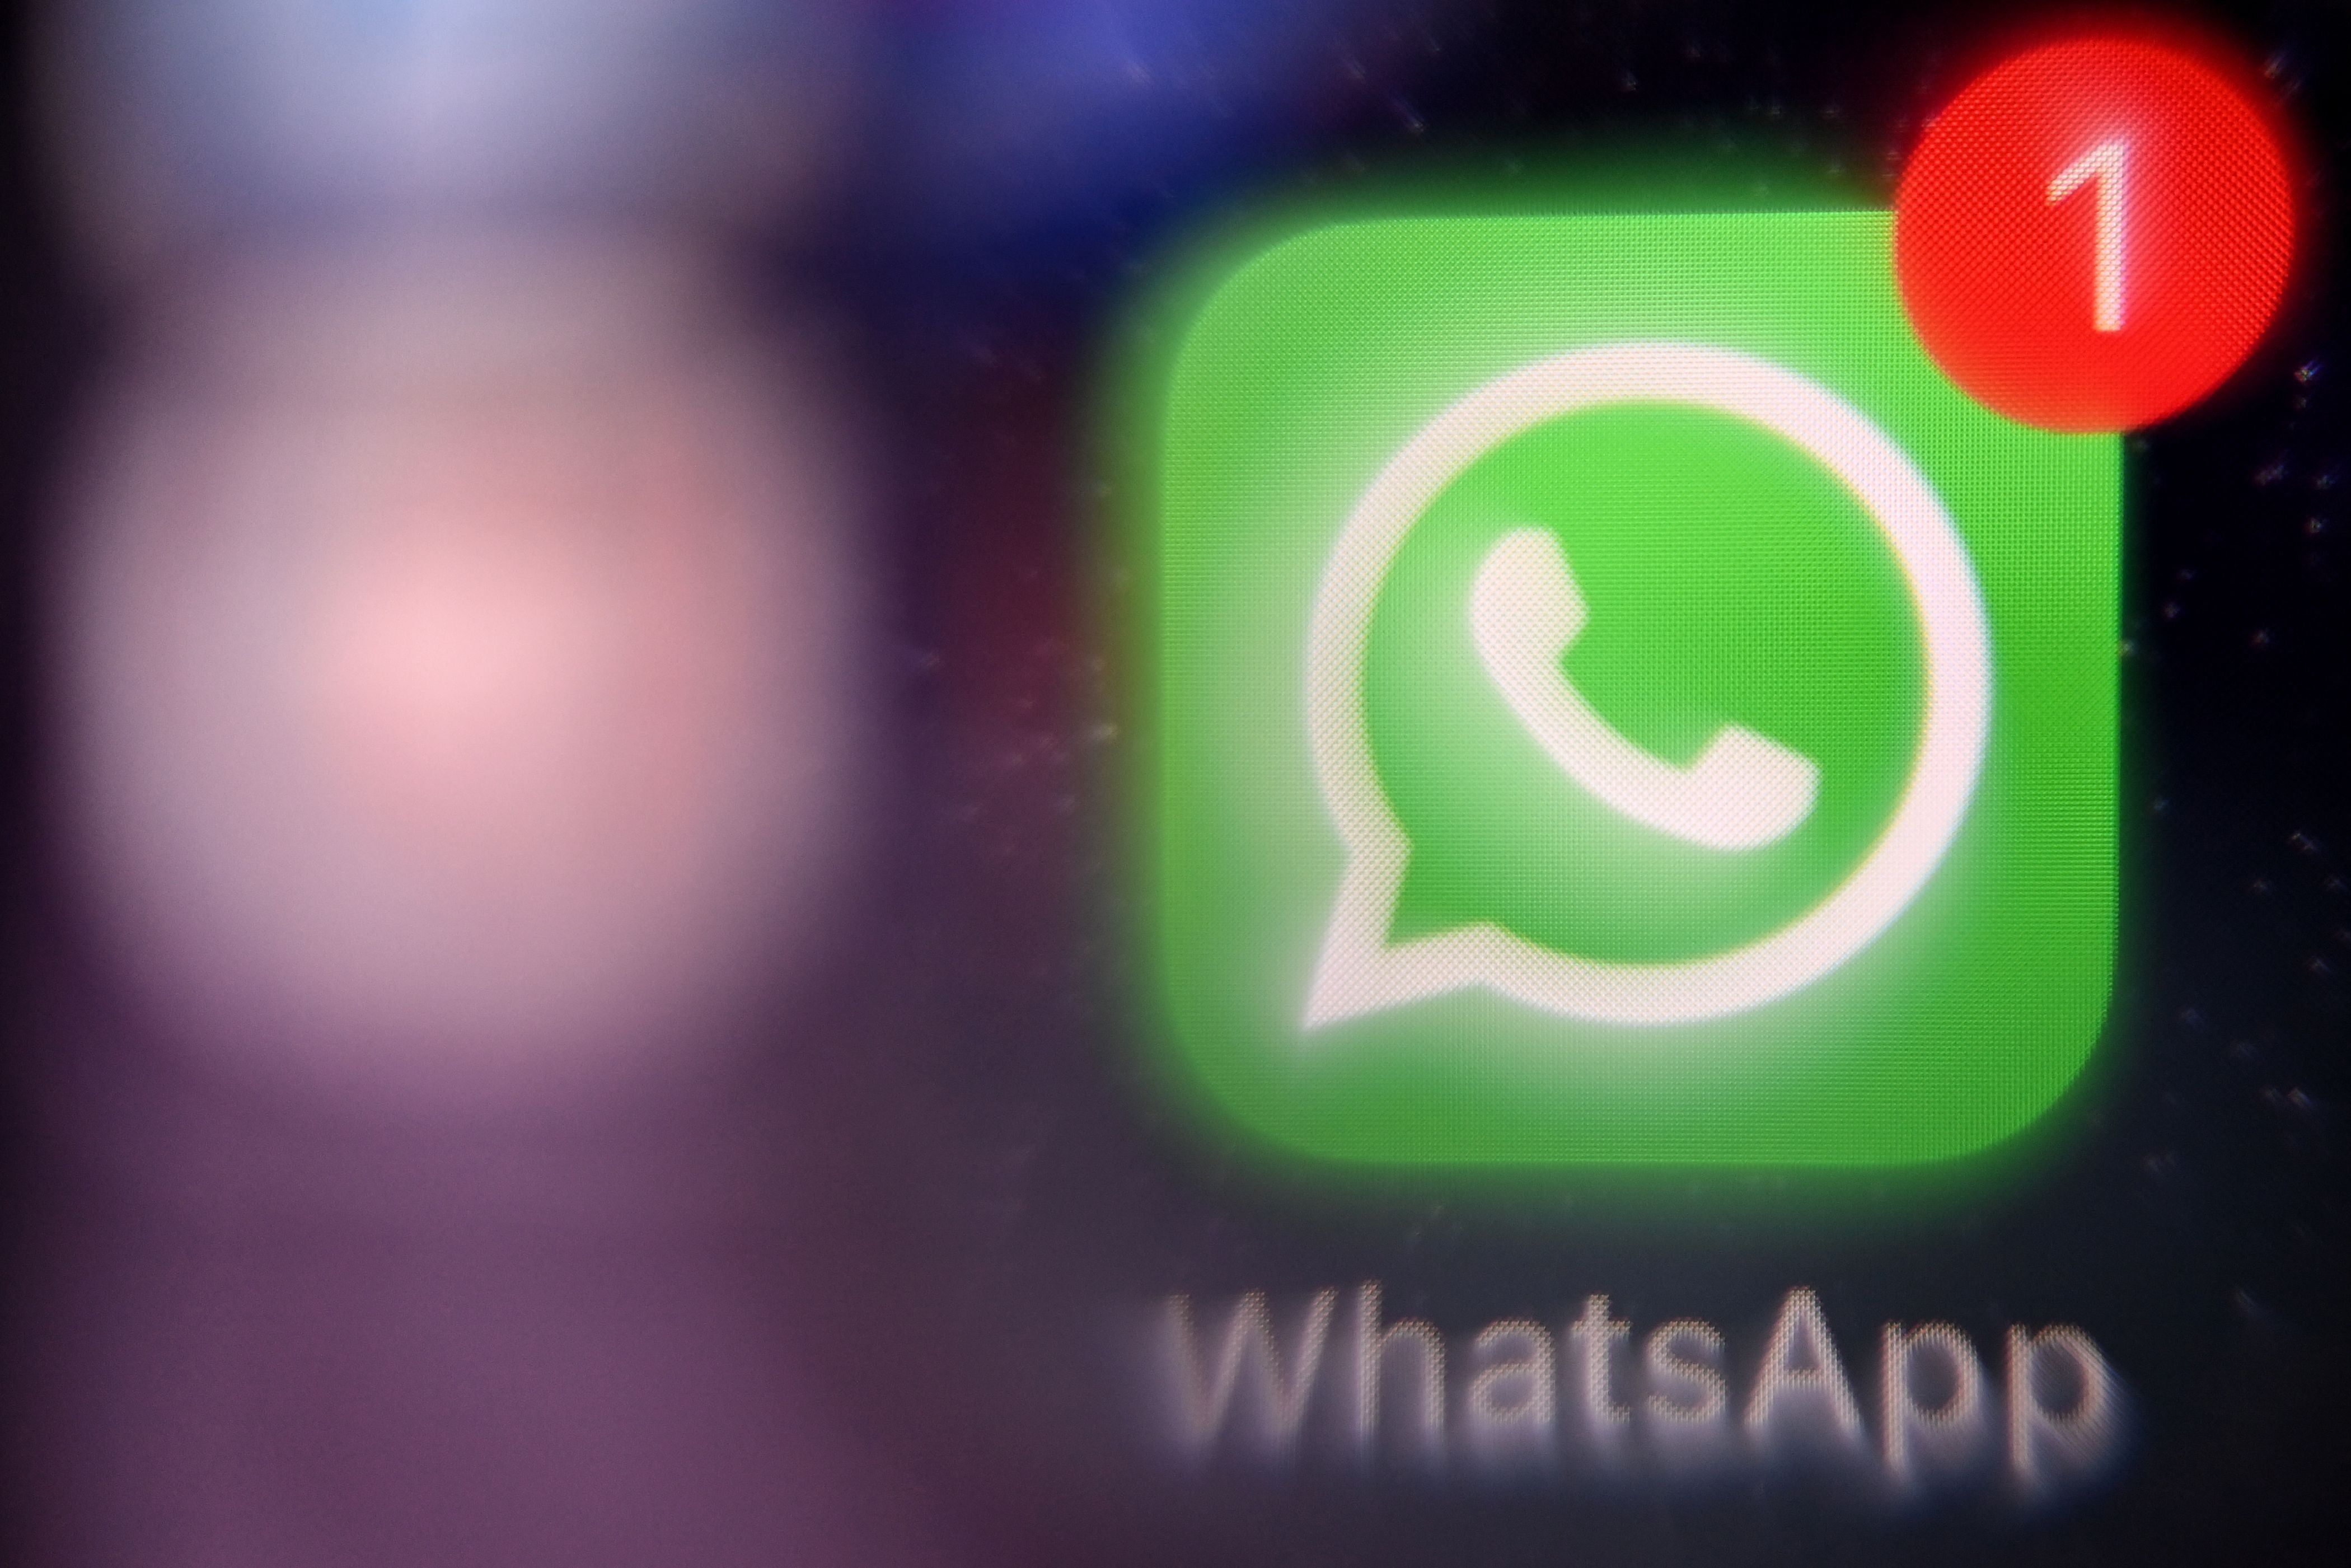 Users have reported issues with WhatsApp over the past two months.